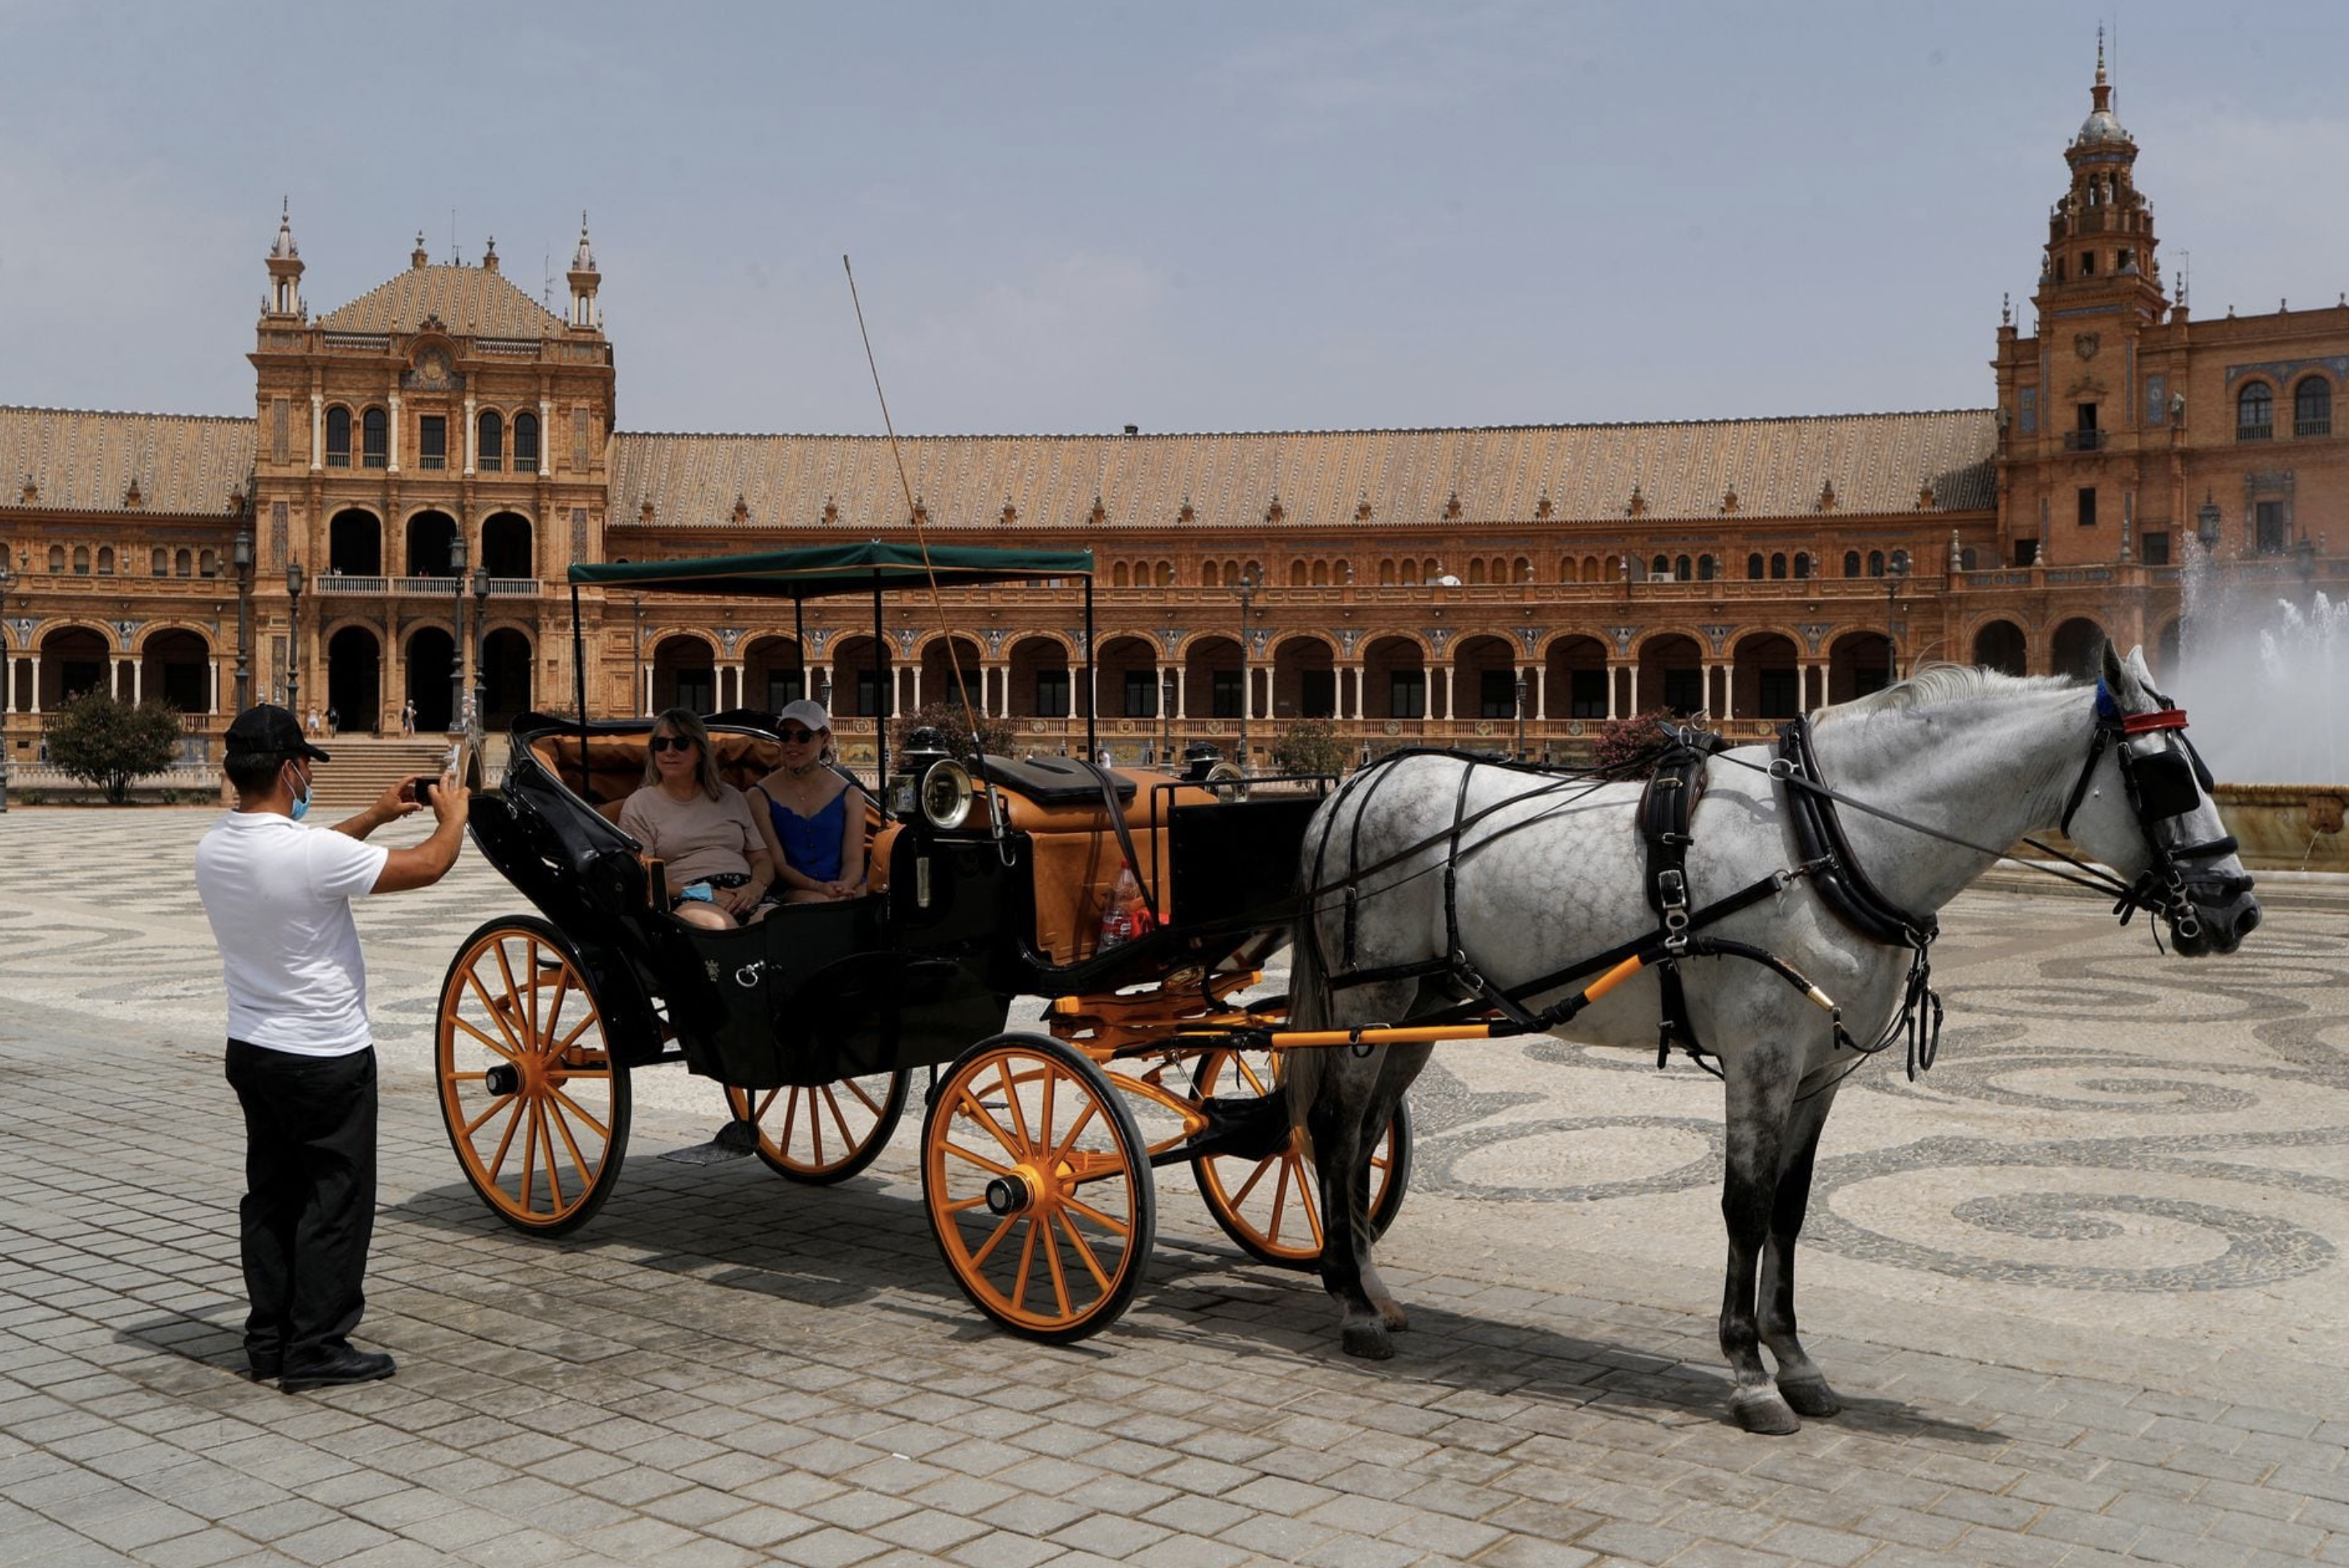 spain's seville plans to charge fee for visiting landmark square